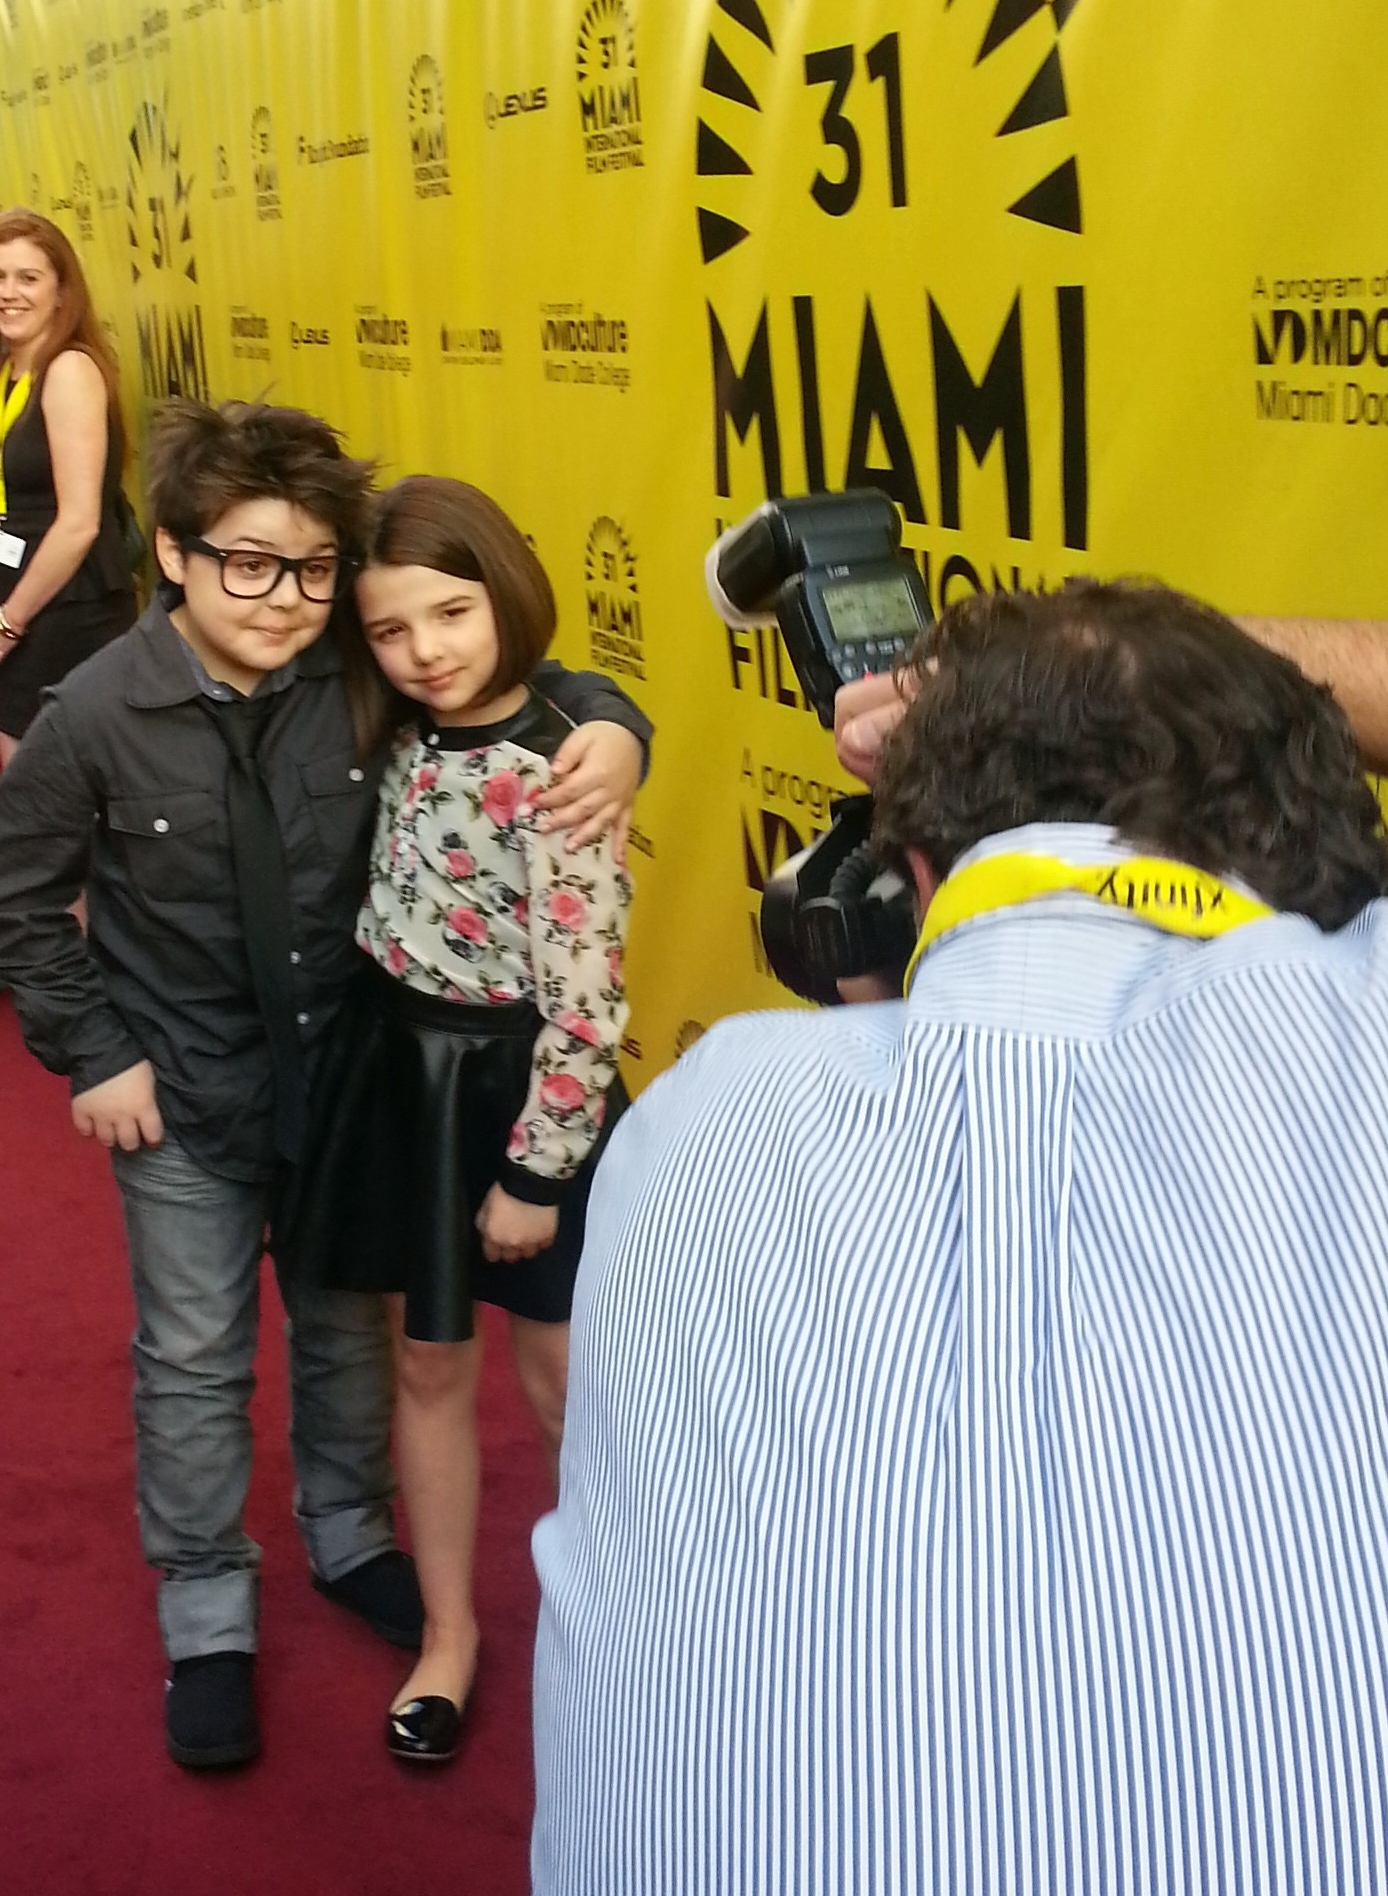 Luke Fava promoting Rob the Mob at the 31st annual Miami Film Festival (March 2014) alongside sister and fellow actor Lucy Fava.